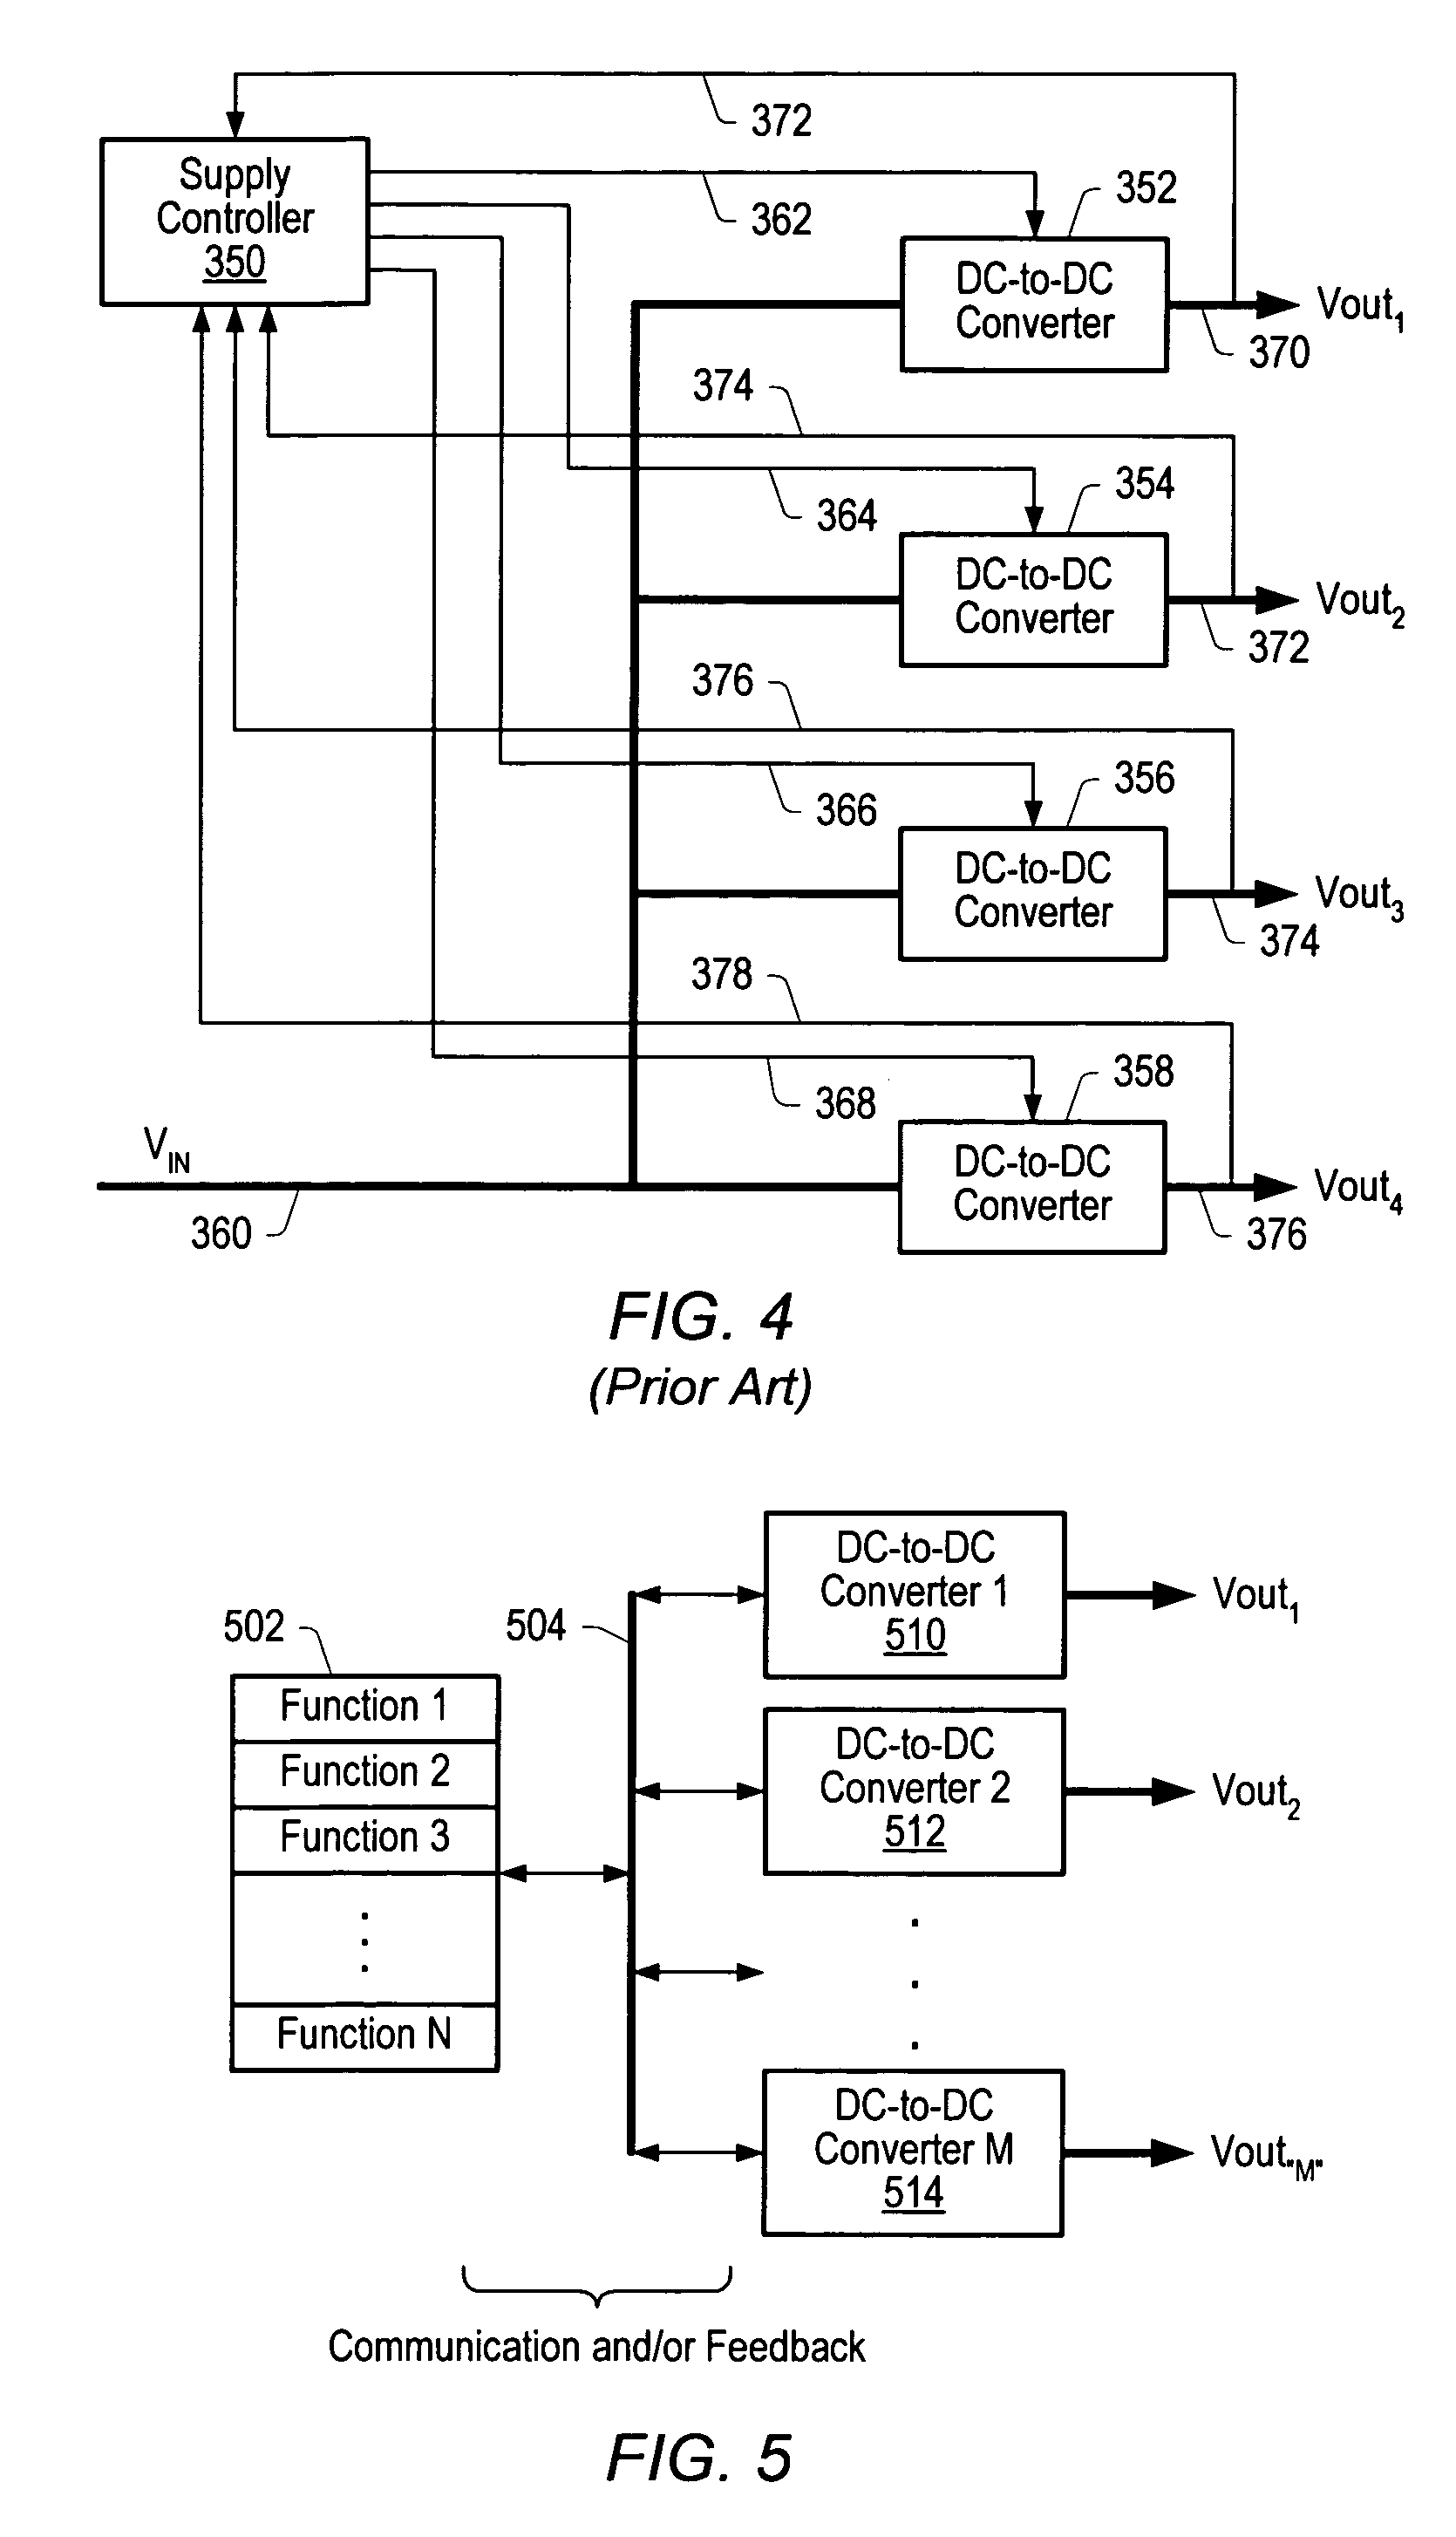 Hardware efficient digital control loop architecture for a power converter